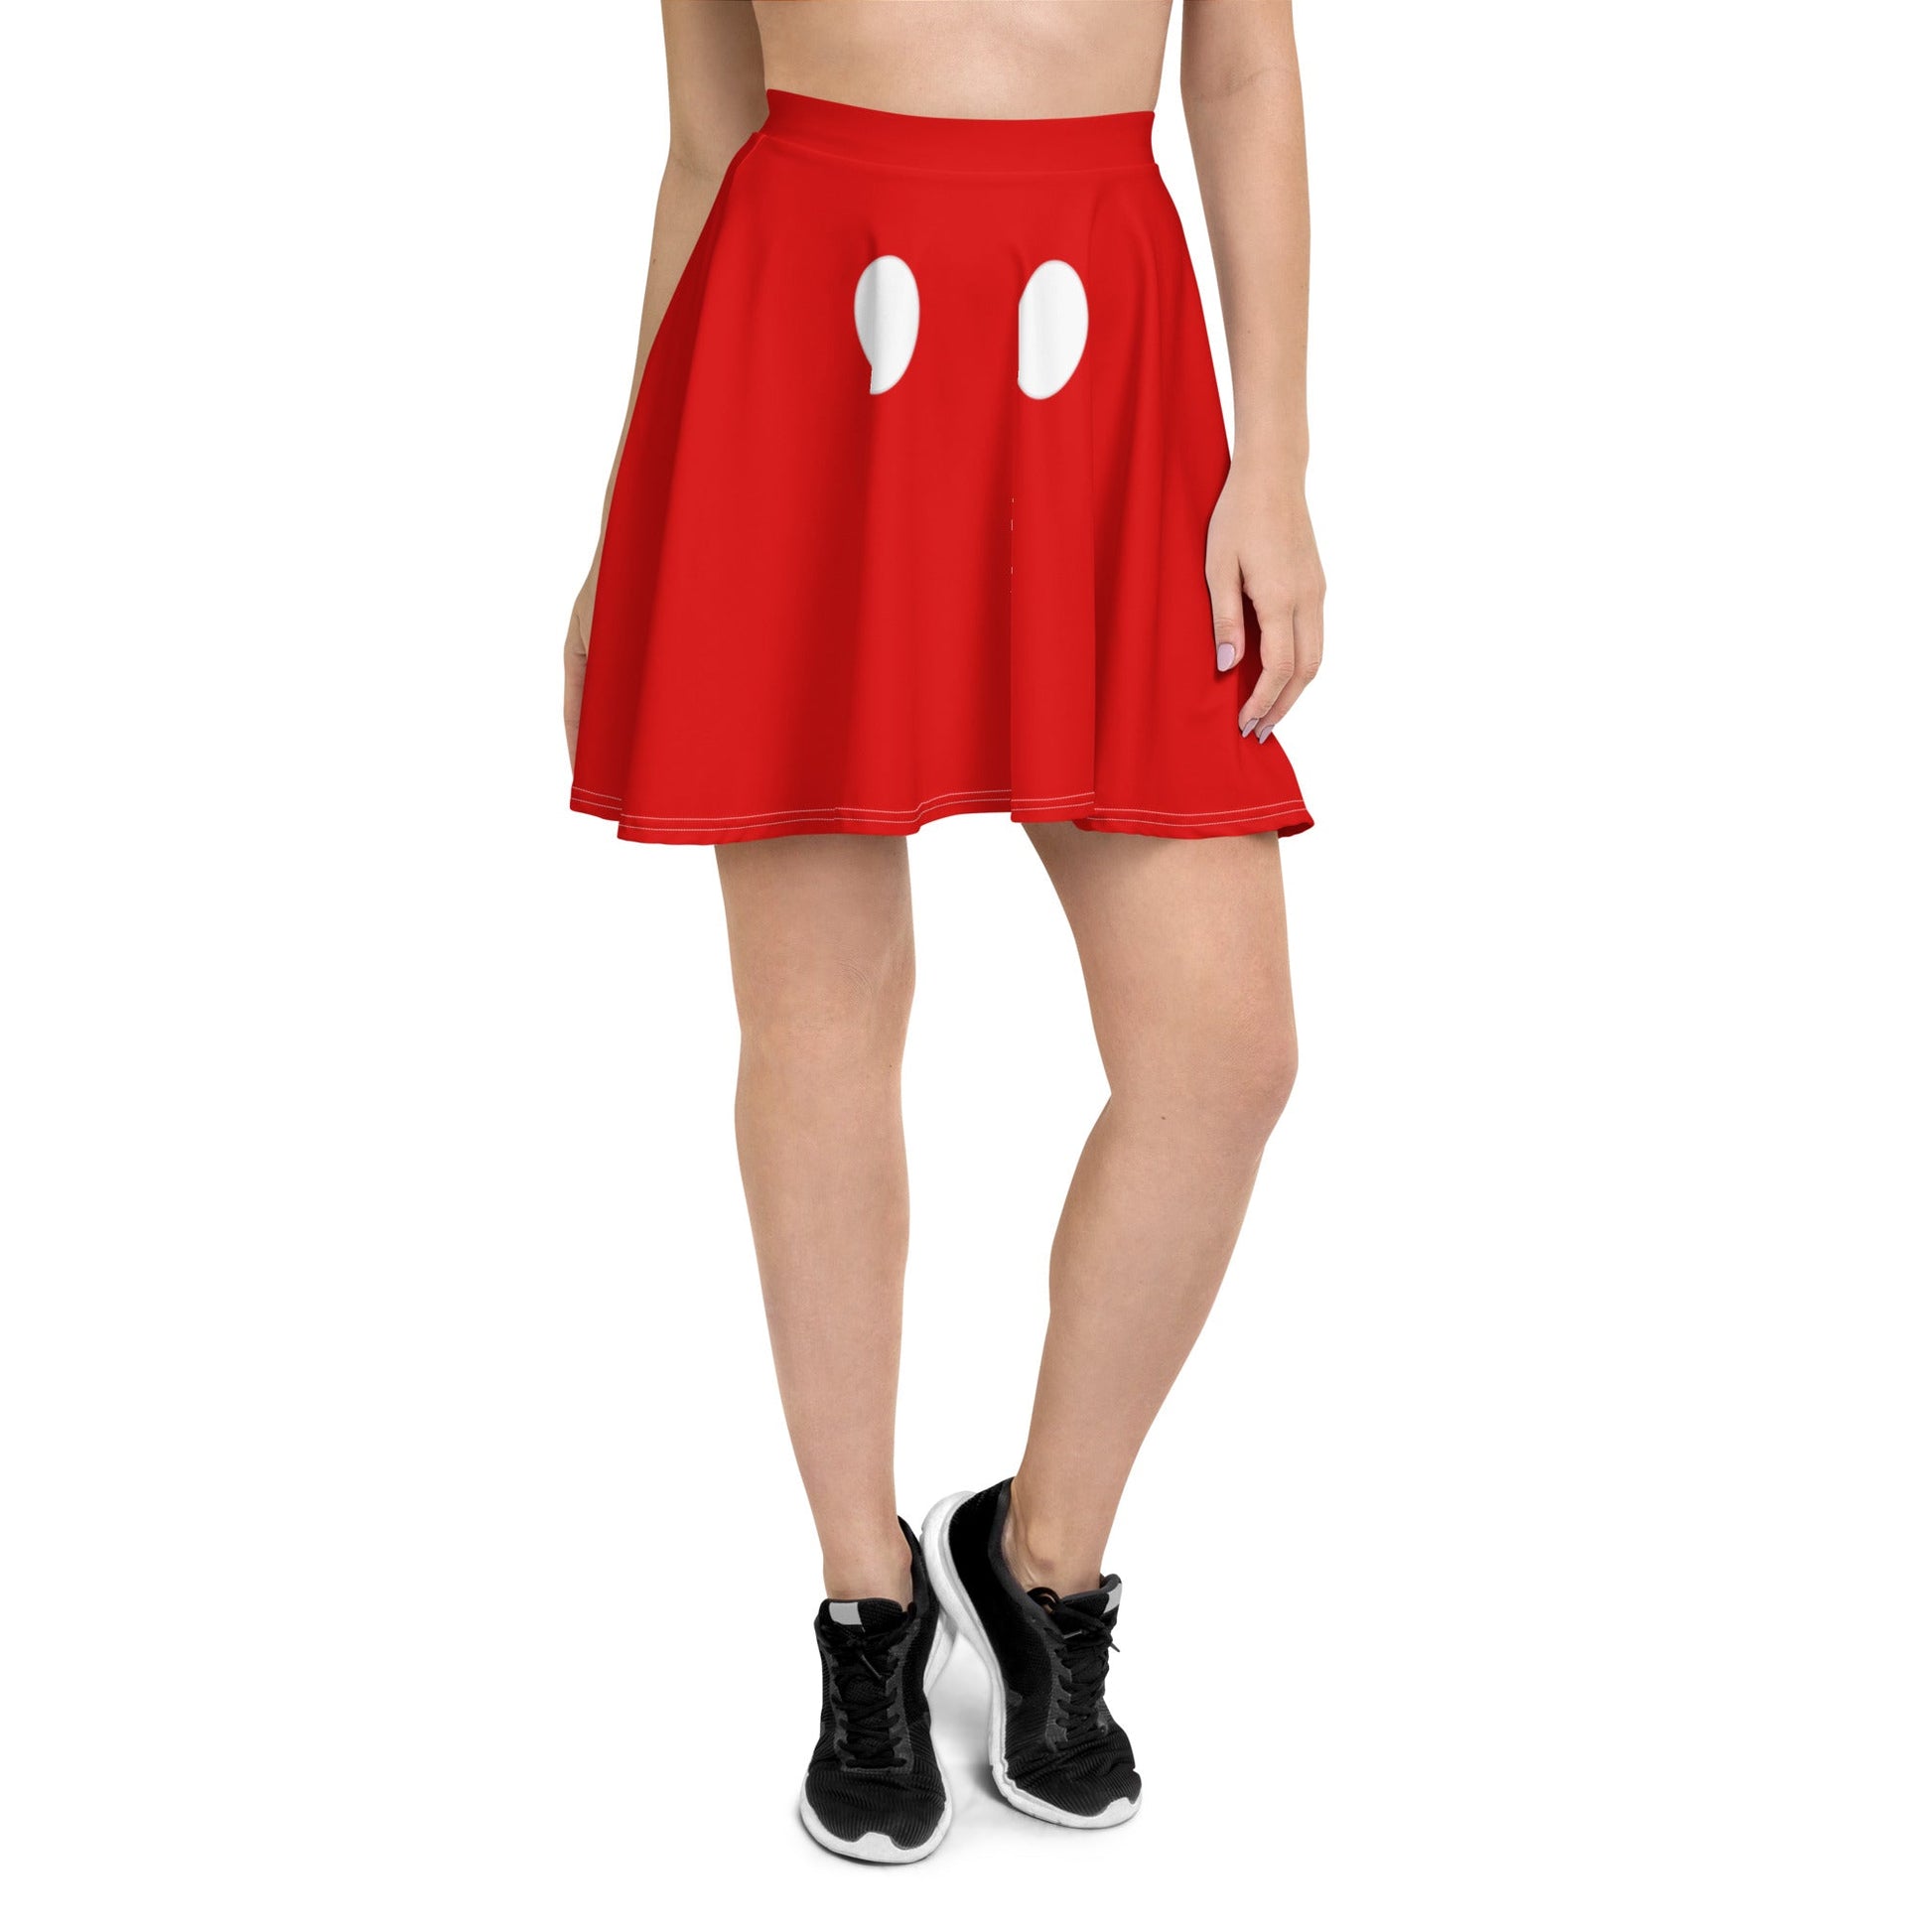 The Man Skater Skirt active wearboo to youdisney bounding#tag4##tag5##tag6#